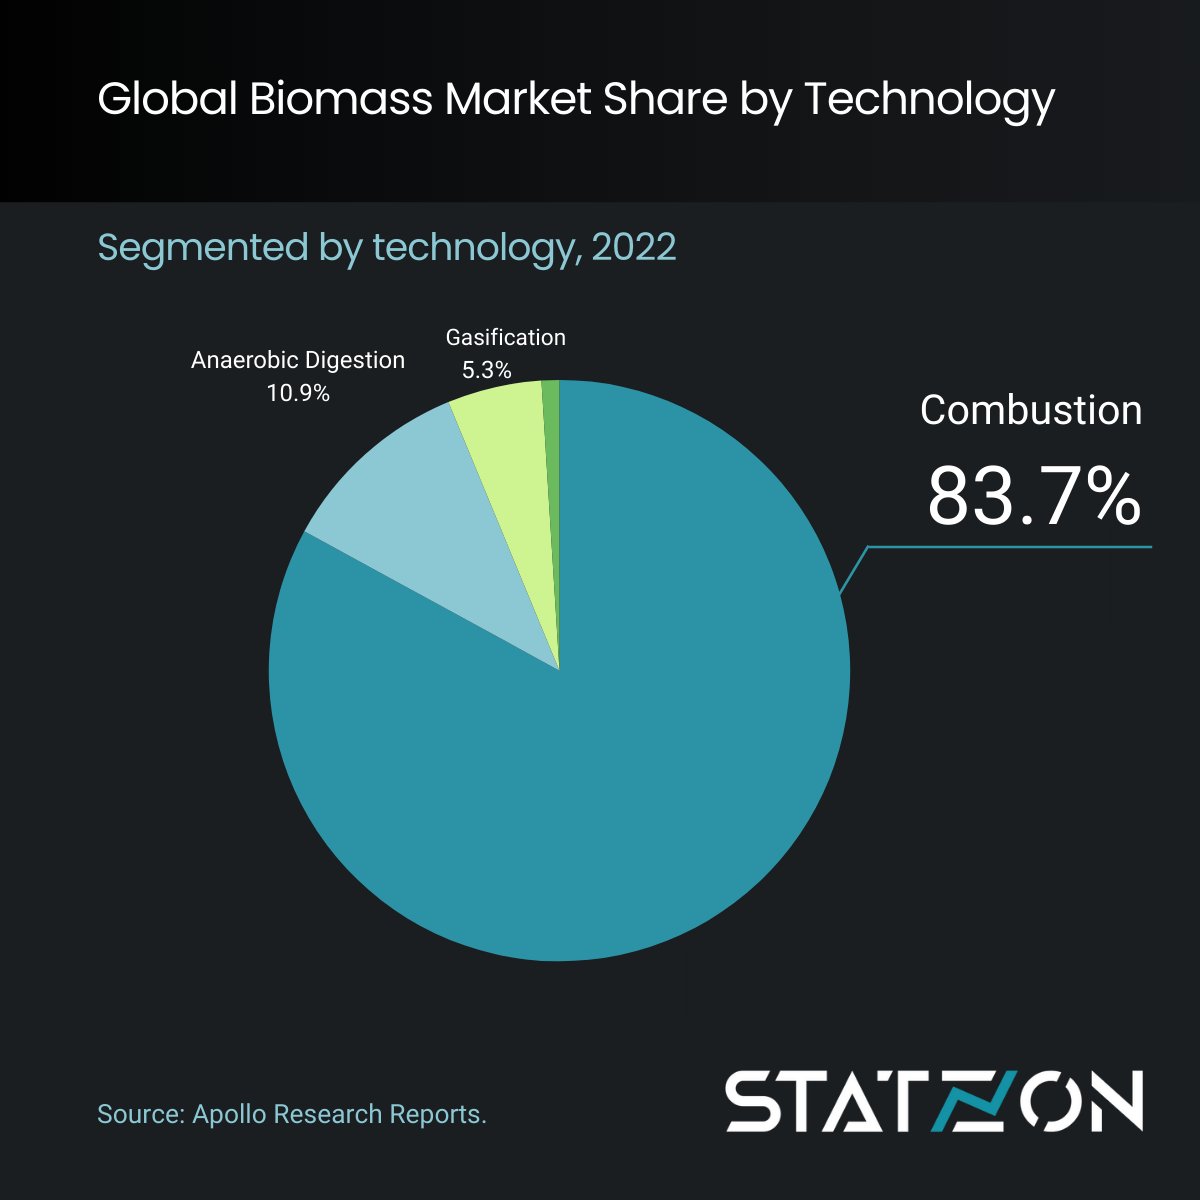 Have you checked the energy article about Biomass? Biomass to Account for 18% of the Energy Market eu1.hubs.ly/H08B3VM0

#biomass #bioenergy #netzeroemissions #nze #energymarket